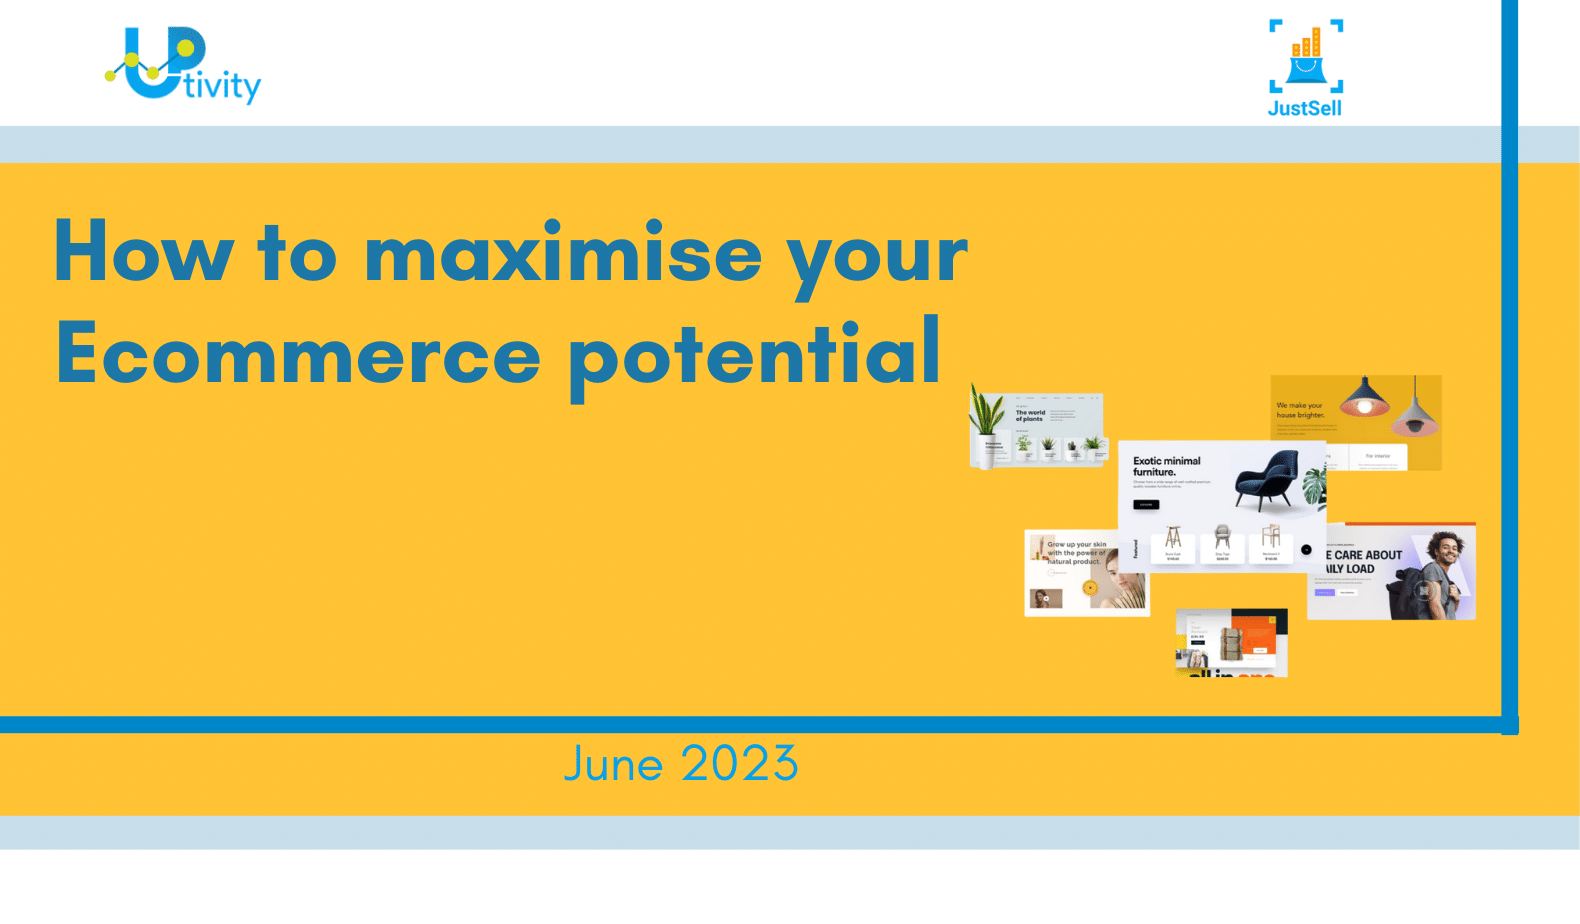 Ecommerce websites increase potential